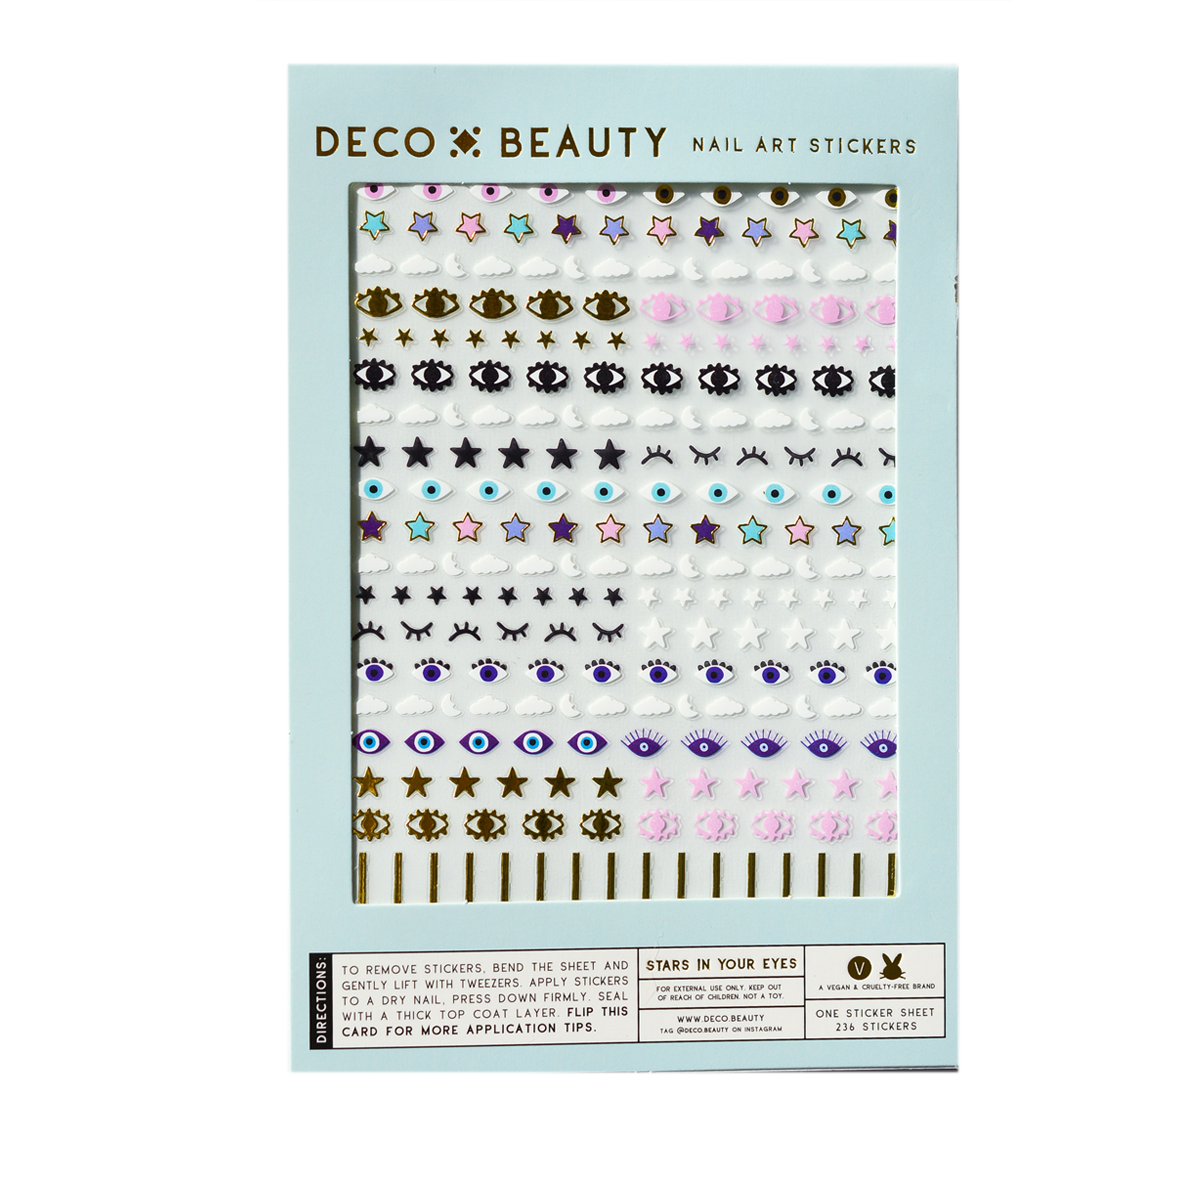 STARS IN YOUR EYES – Deco Beauty